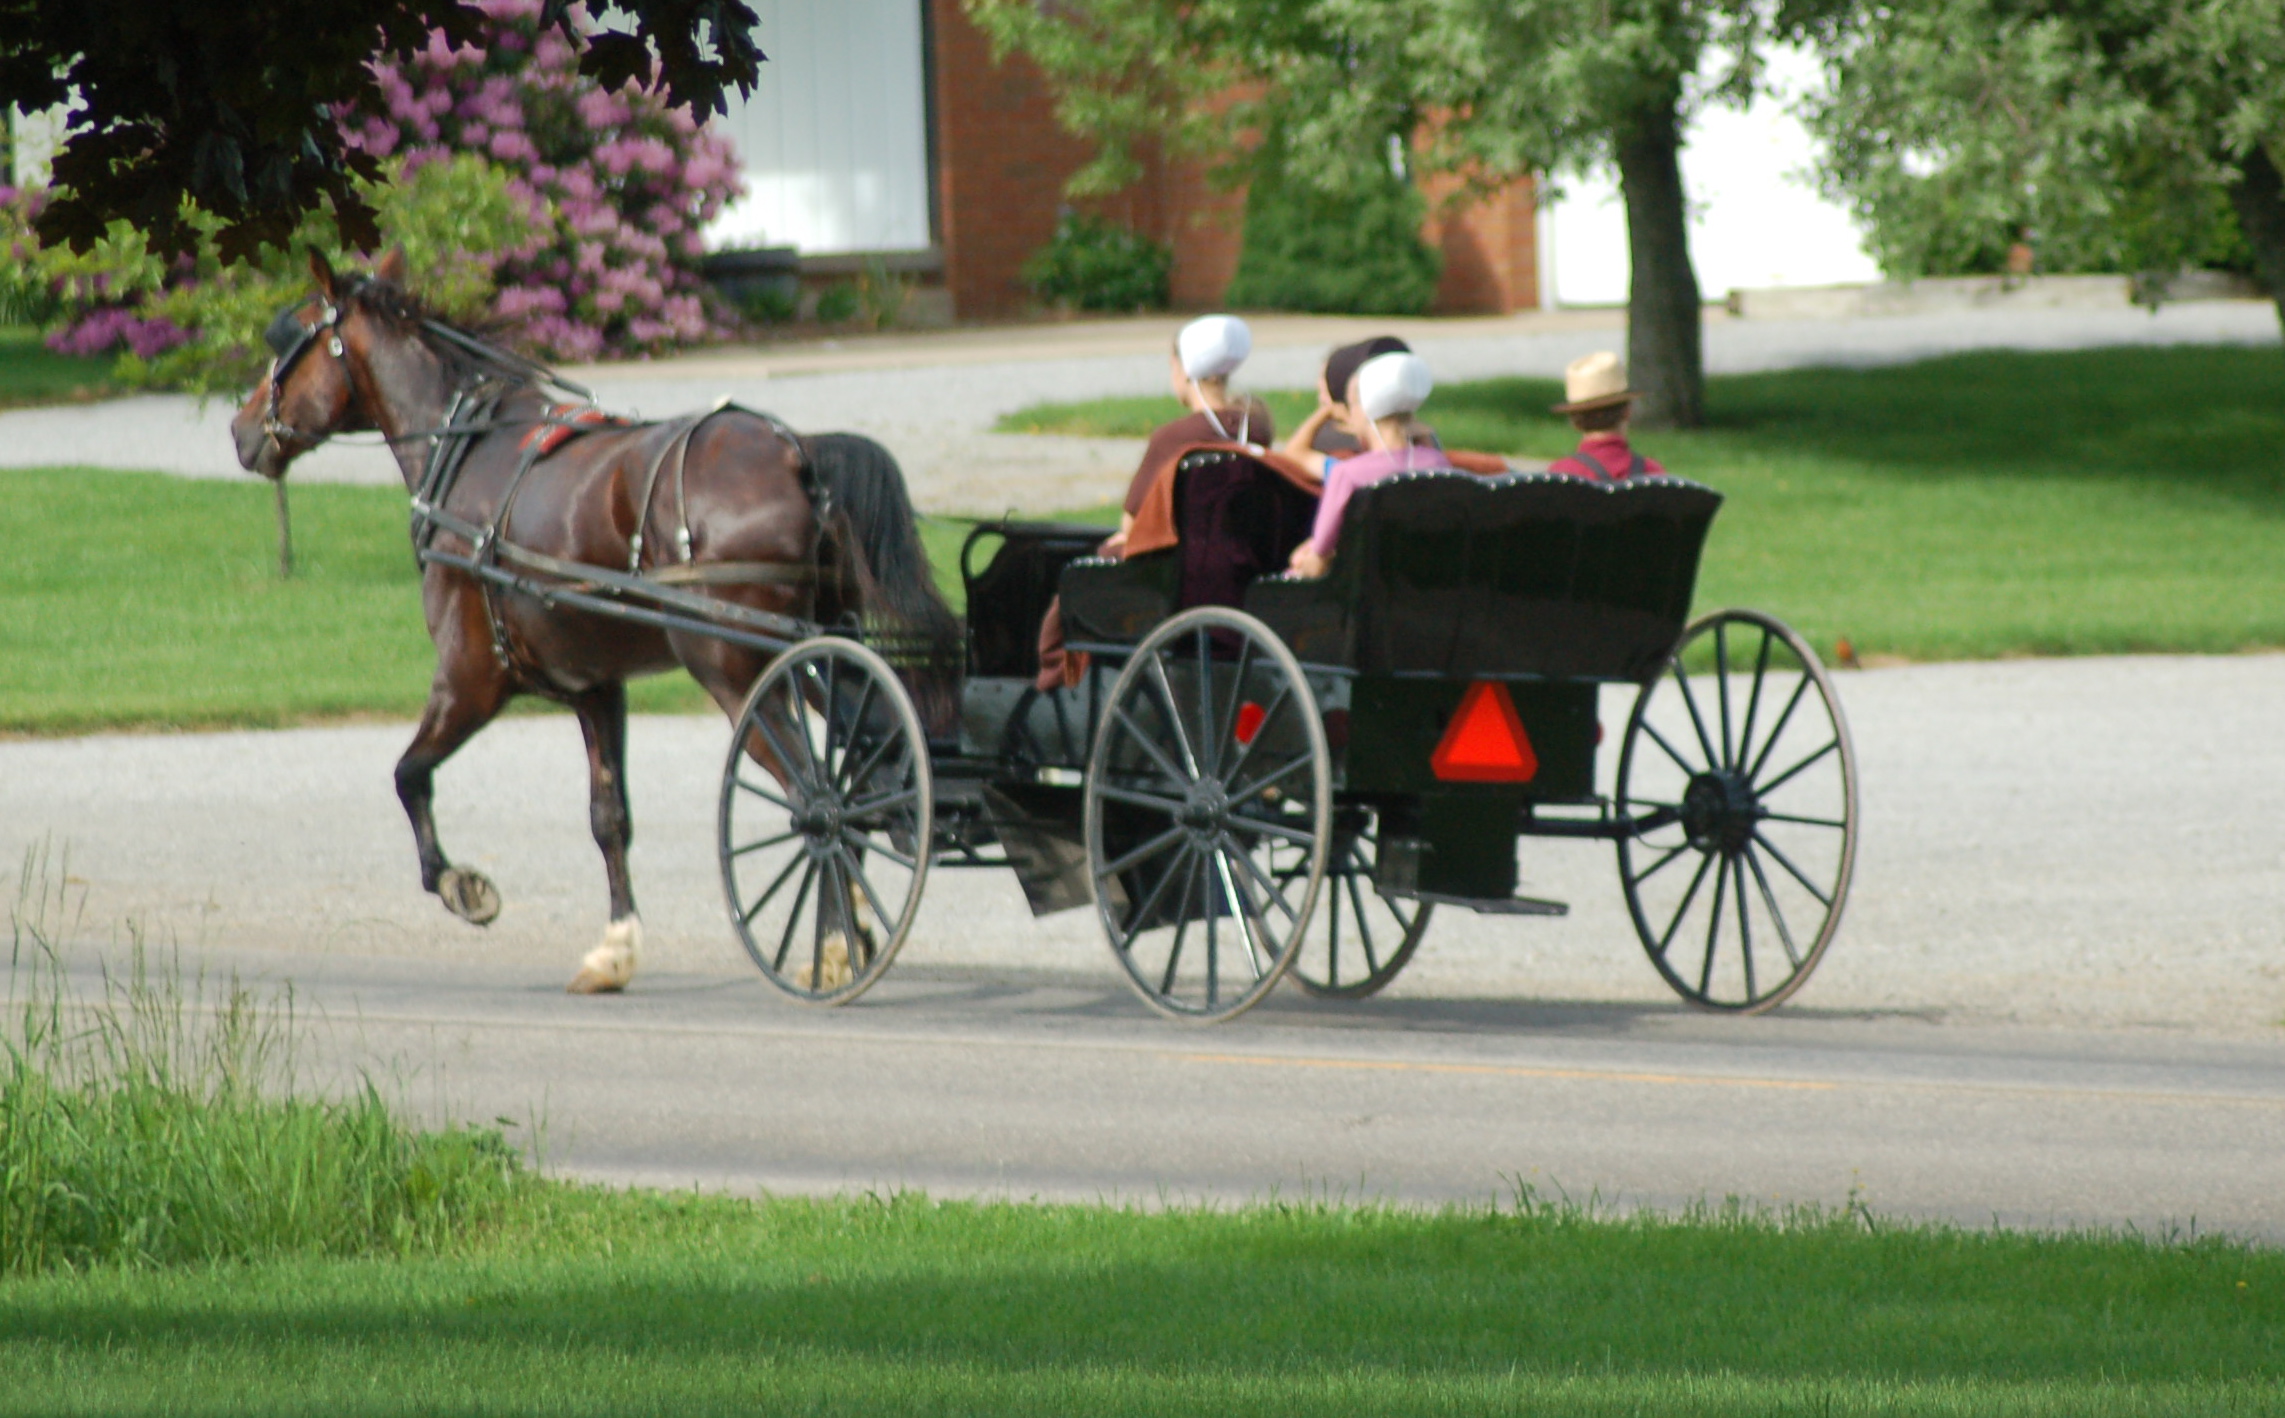 The pleasure and perils of driving in Amish country | Roadkill Crossing